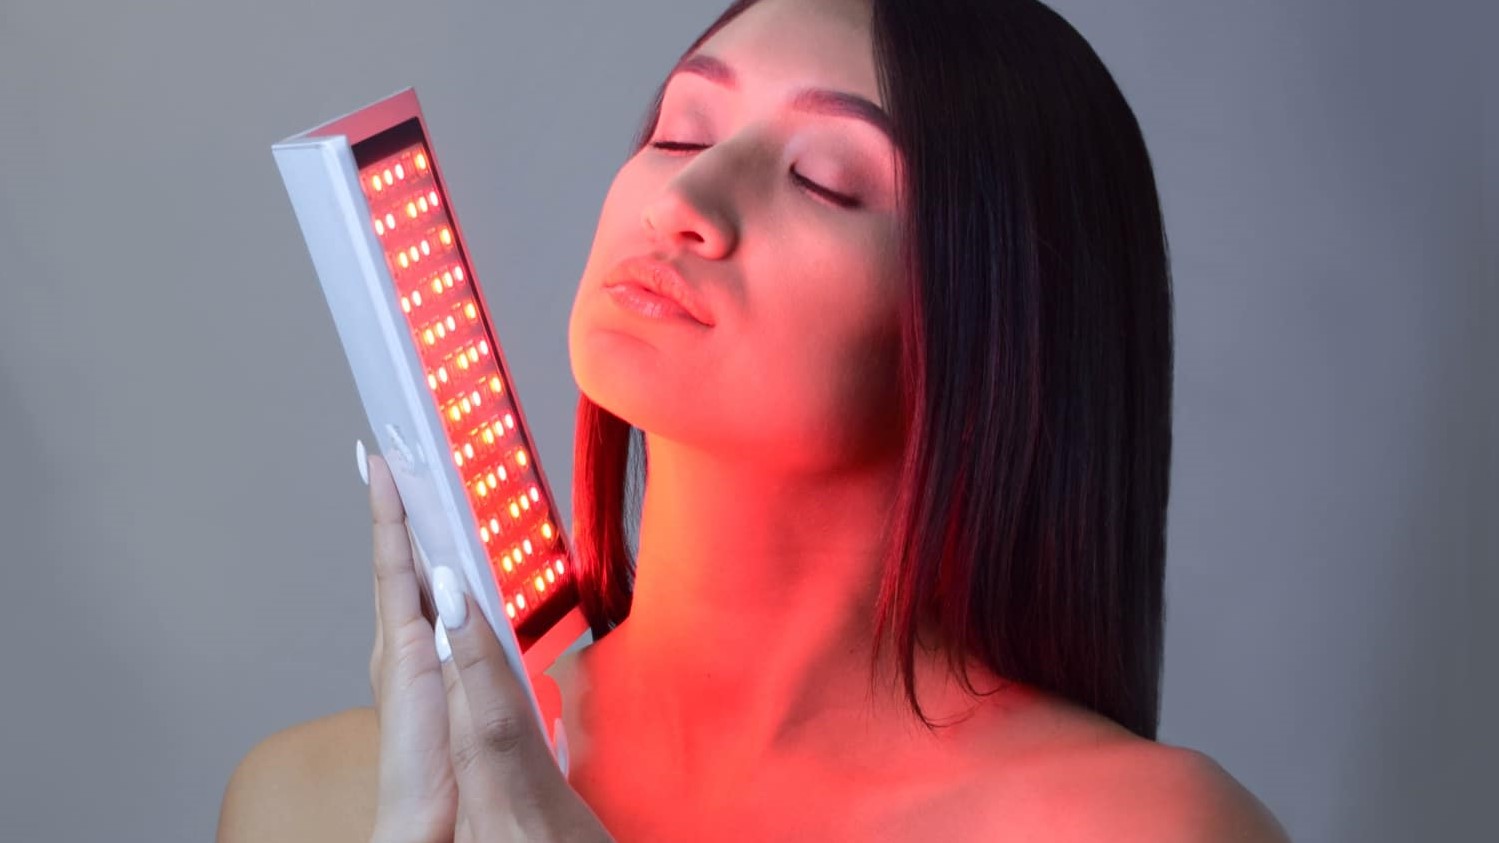 red light device woman